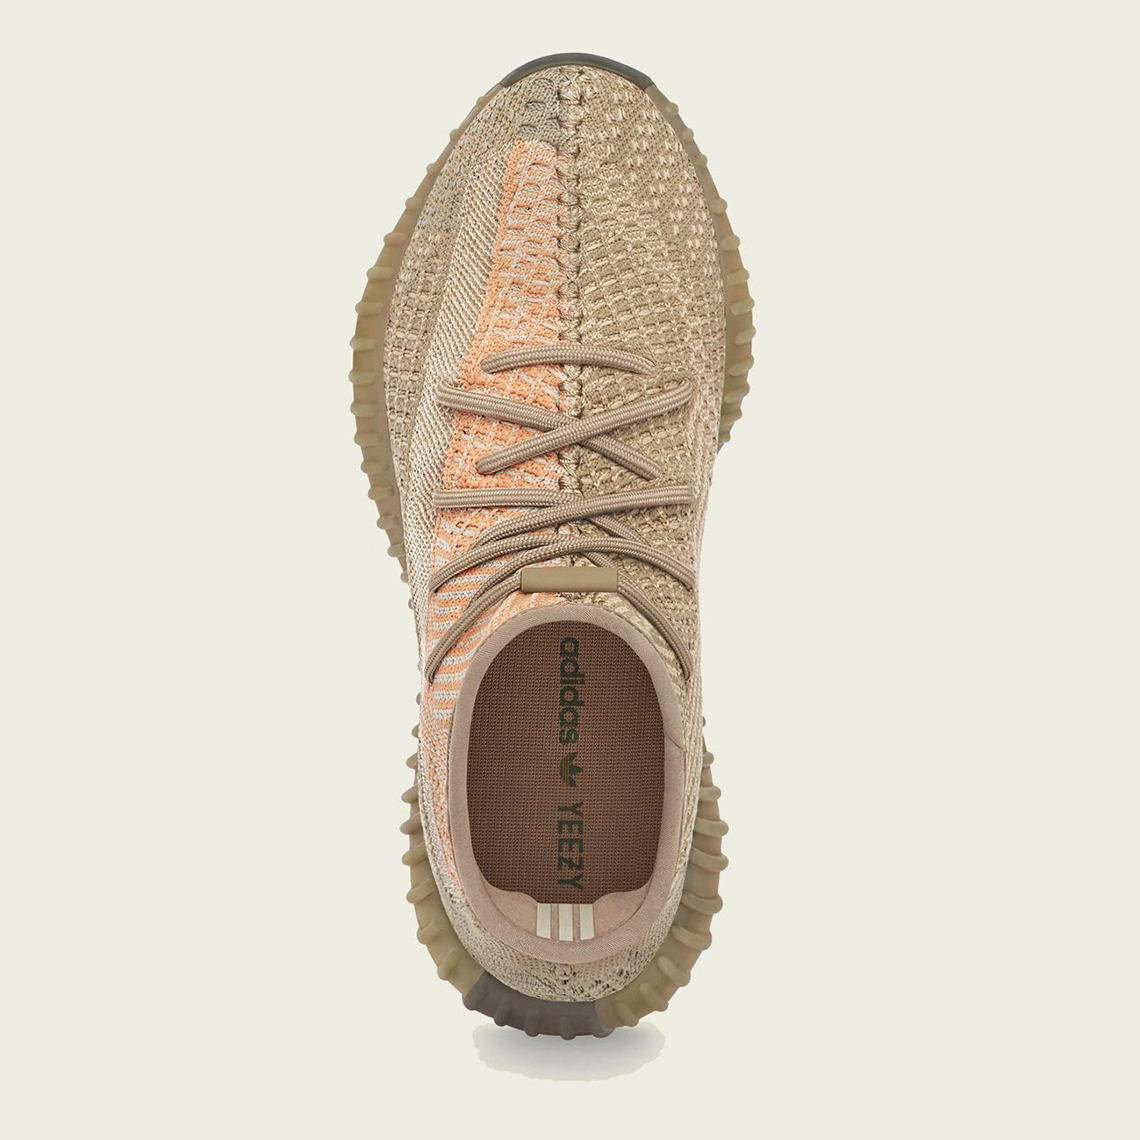 adidas Yeezy Boost 350 V2 “Sand Taupe” Releasing December 18th ...